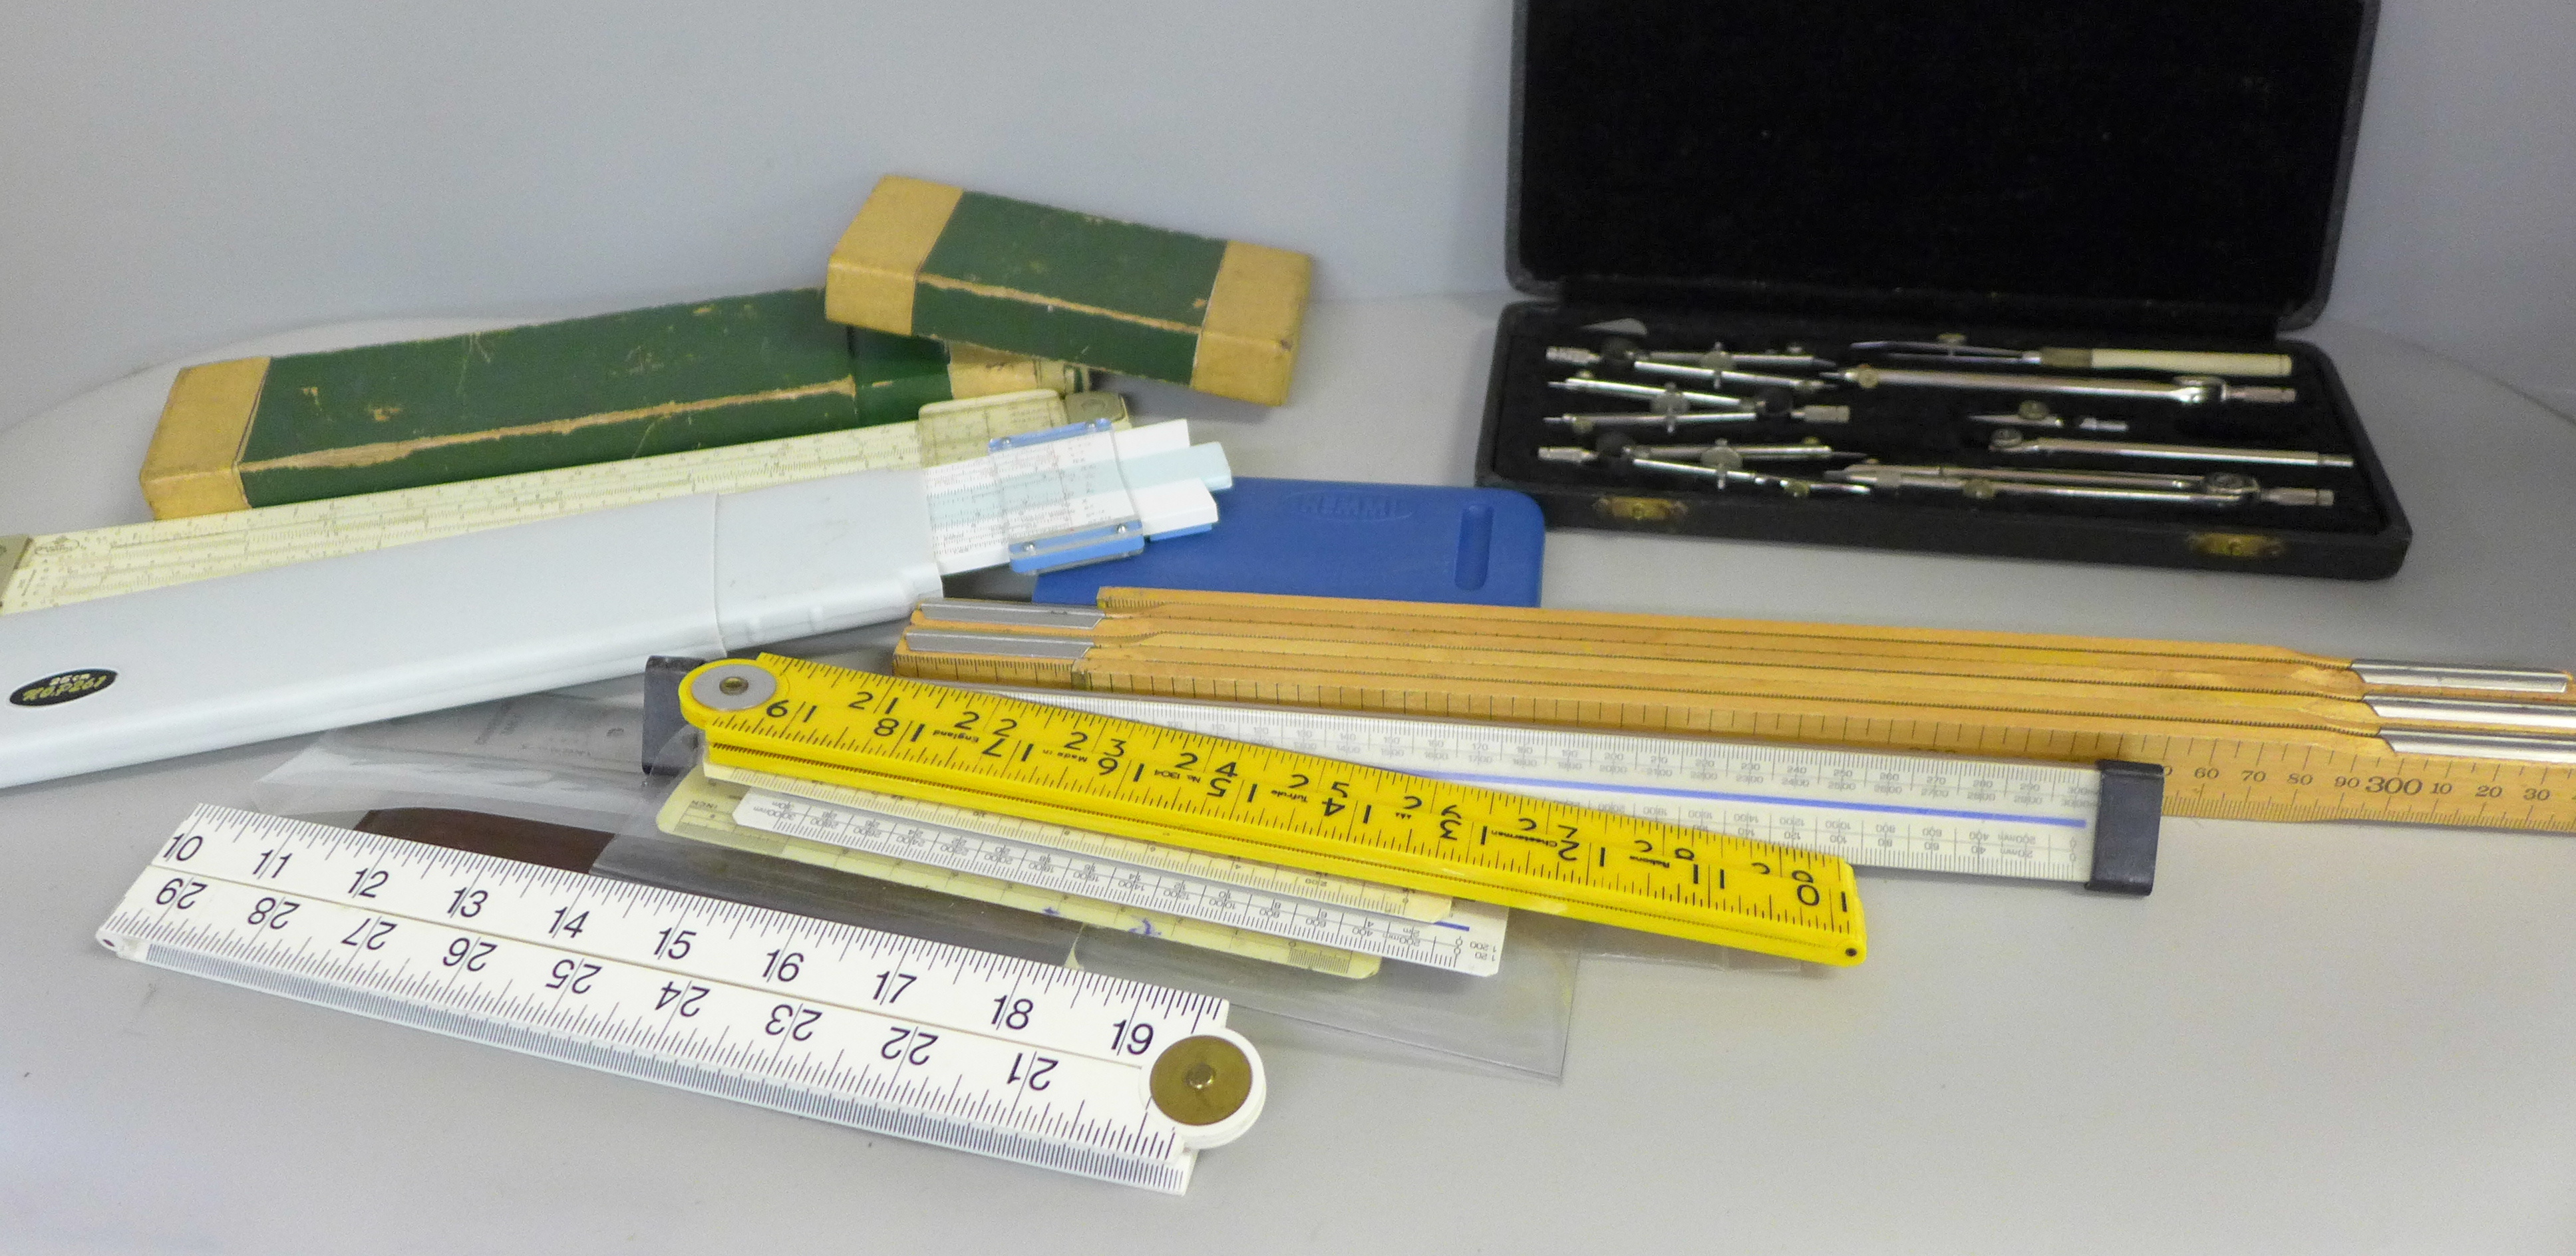 A Lee Guinness technical drawing set, slide rules and rulers, etc.